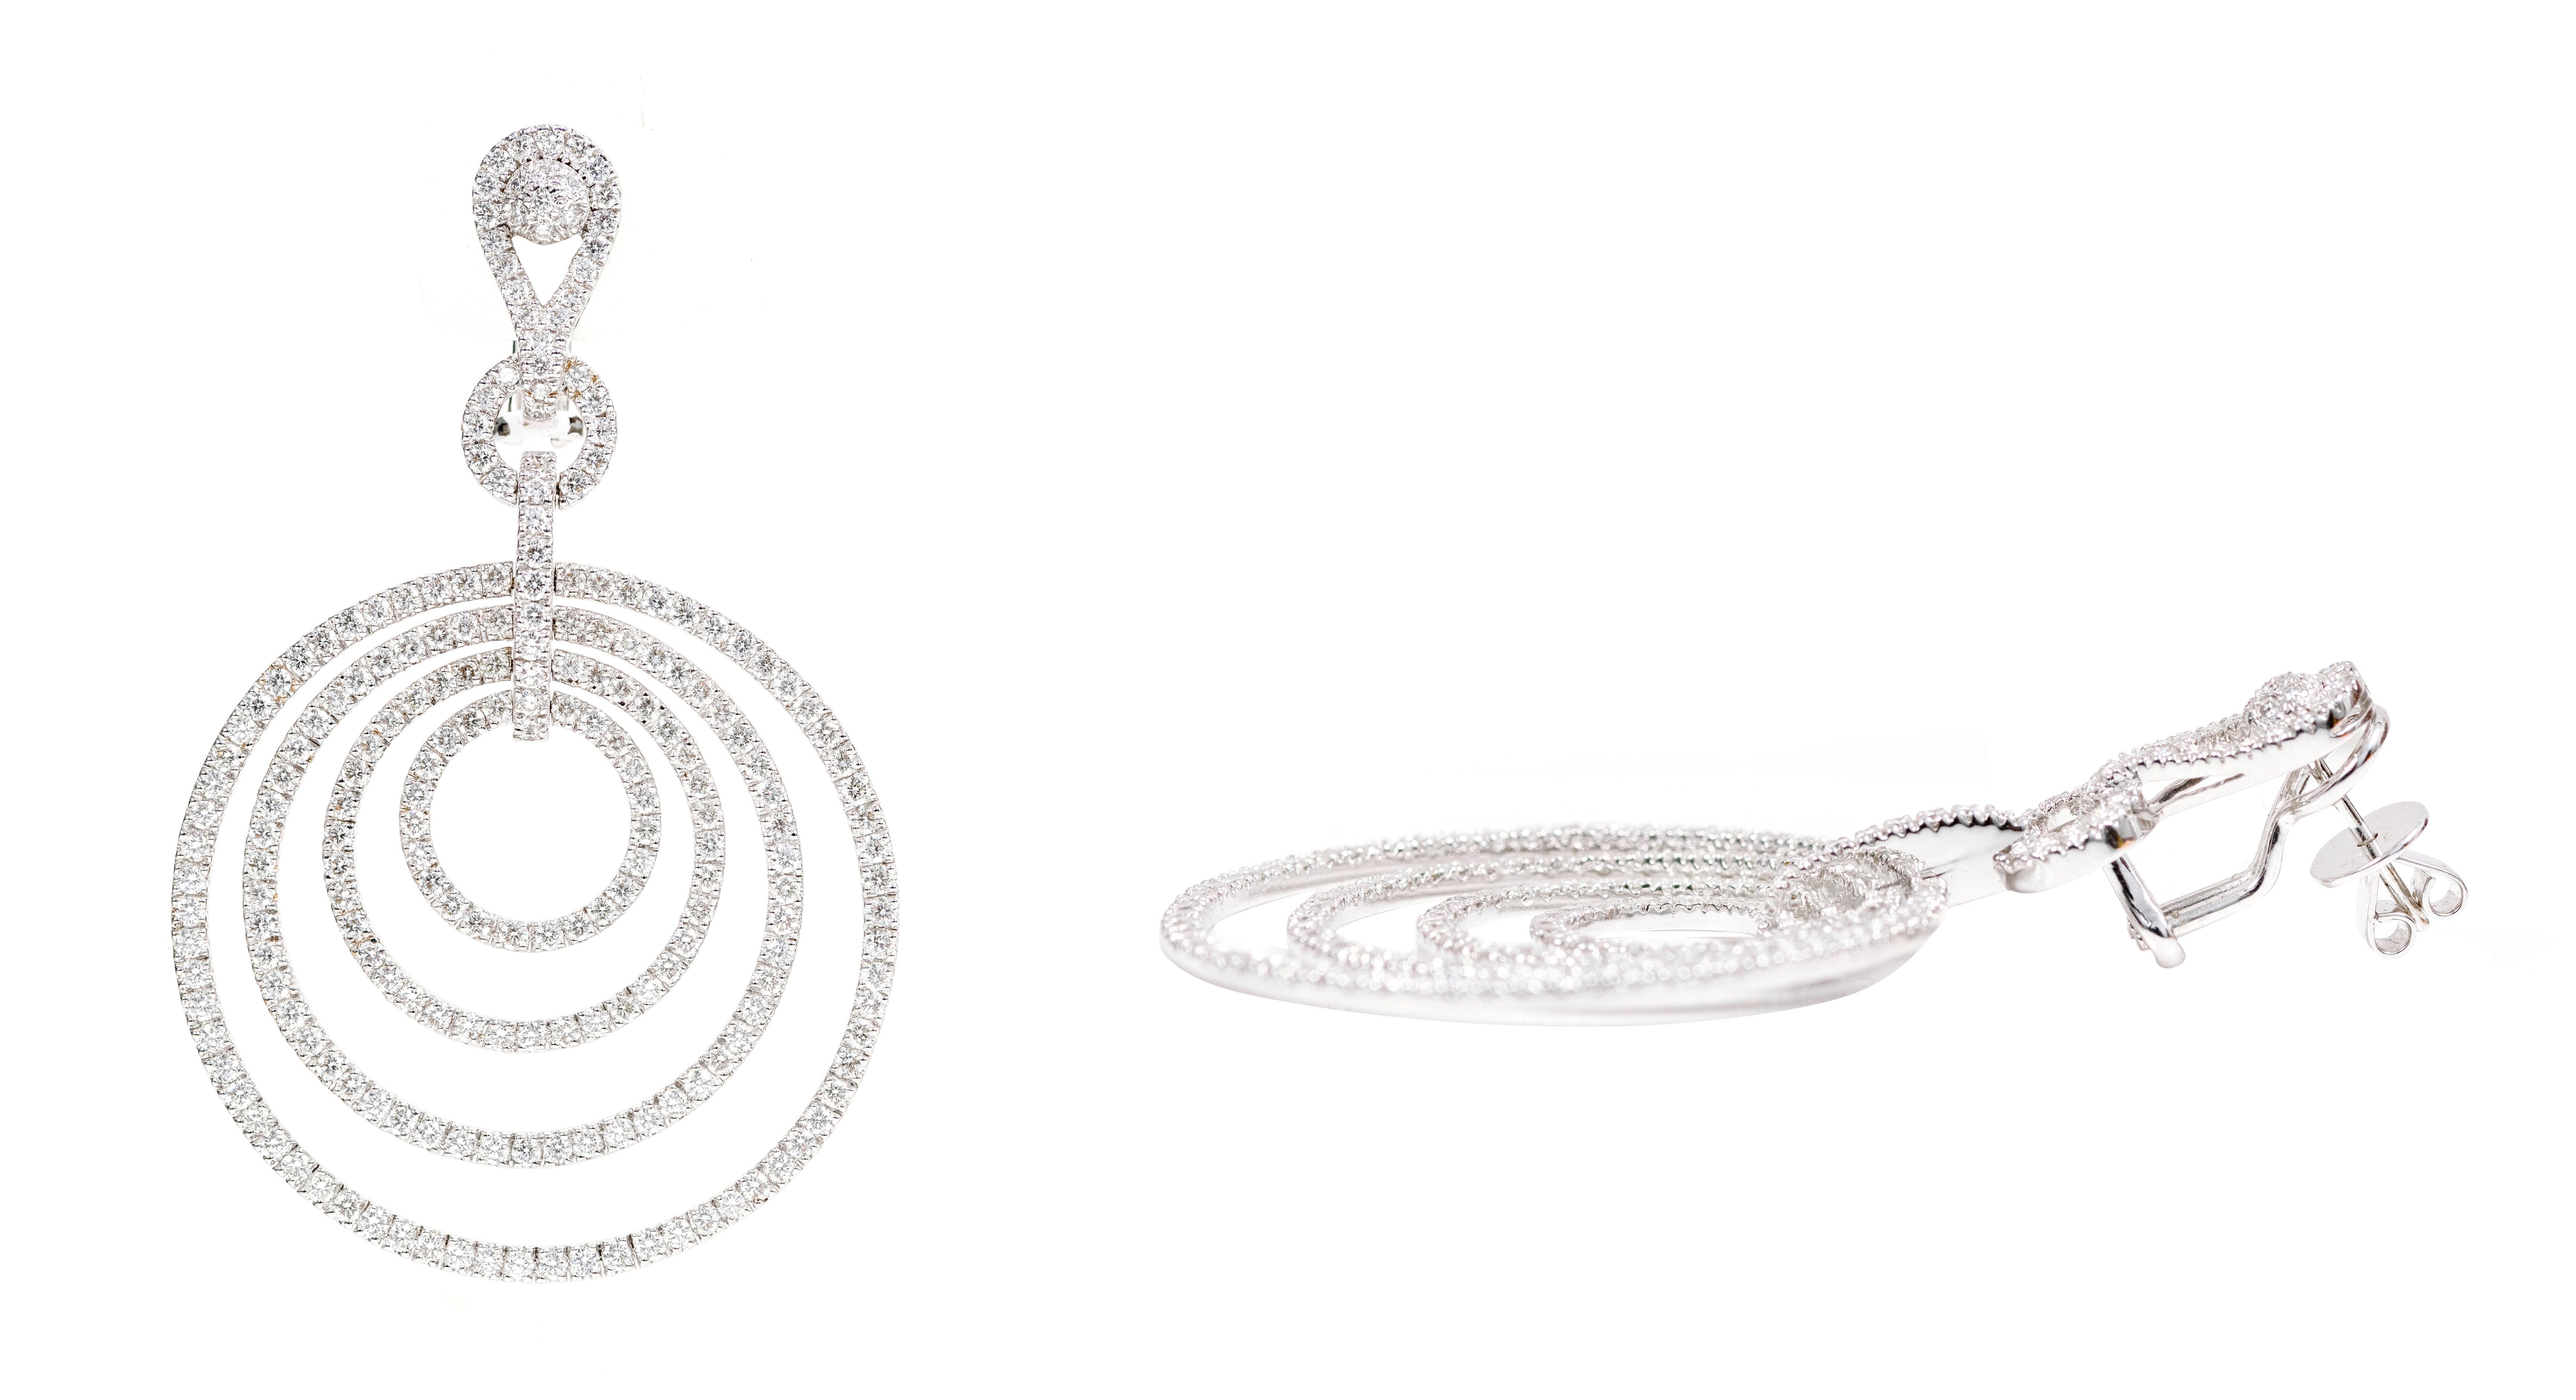 18 Karat White Gold 7.26 Carat Brilliant-Cut Diamond Dangle Earrings in Modern Style

This magnificent diamond graduating loop earring is phenomenal. The elegant designer concept of the four round graduating circular loops covered with a single row